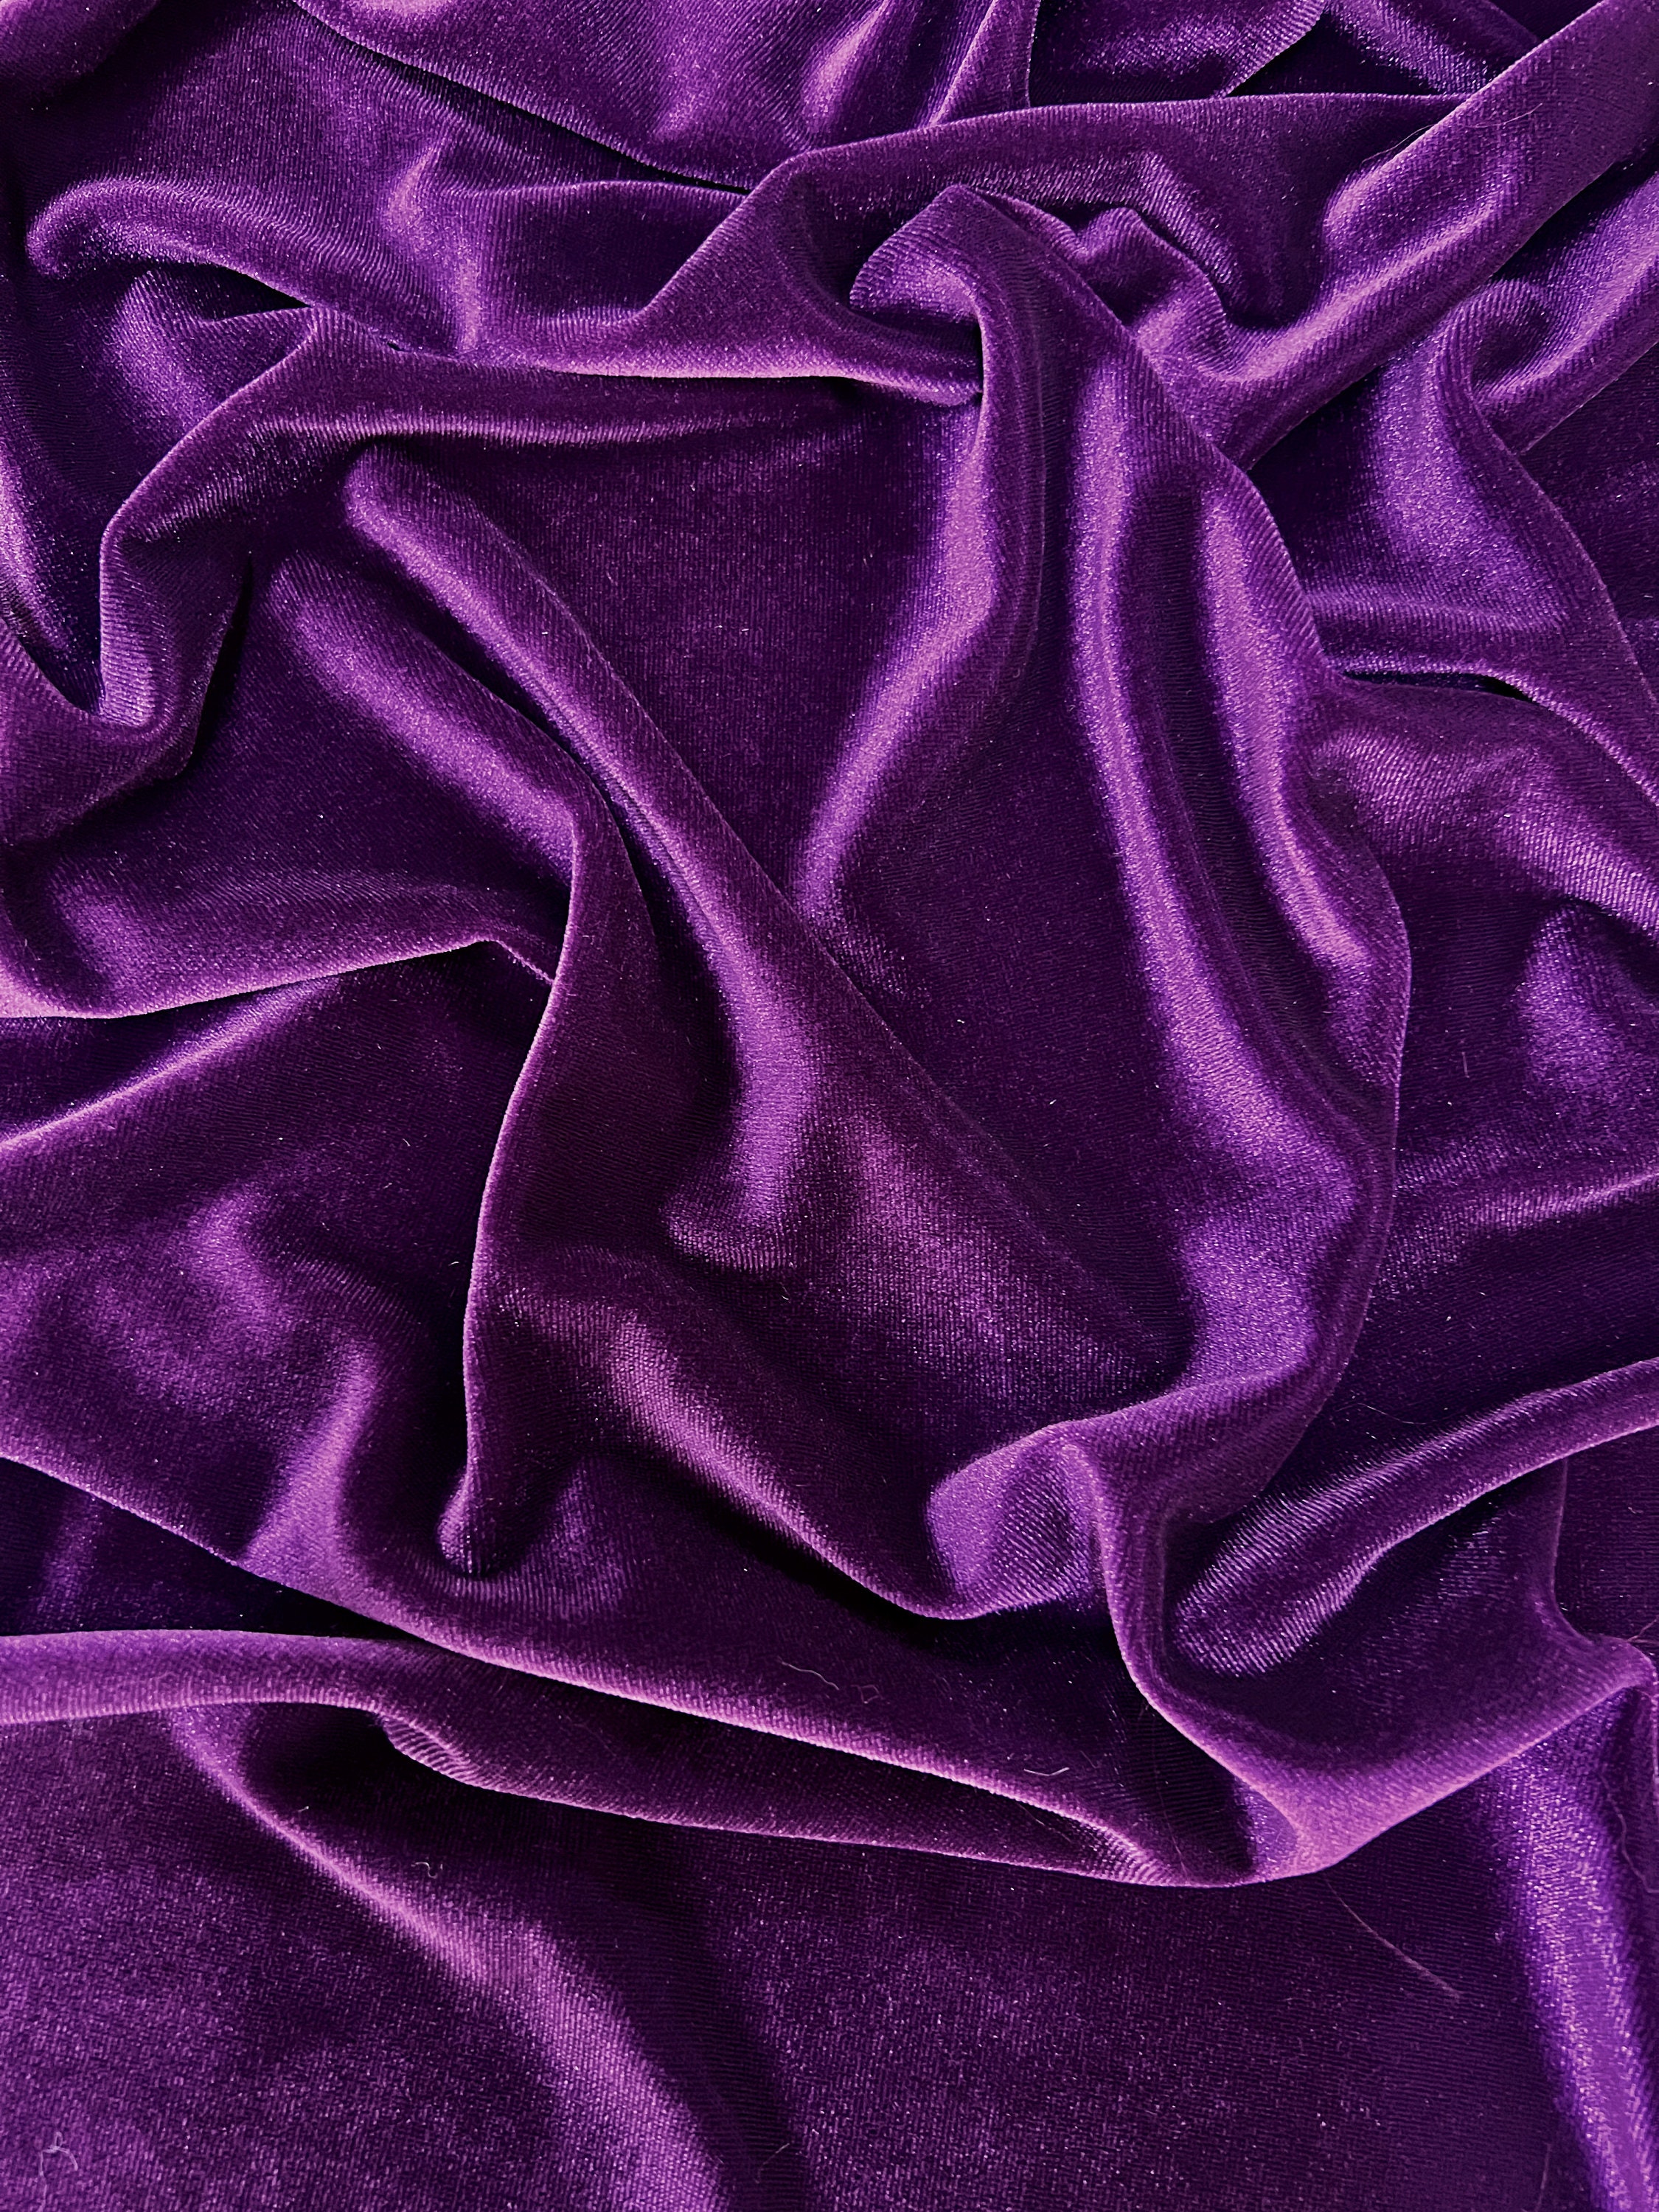 Princess DUSTY PINK-B Polyester Stretch Velvet Fabric for Bows